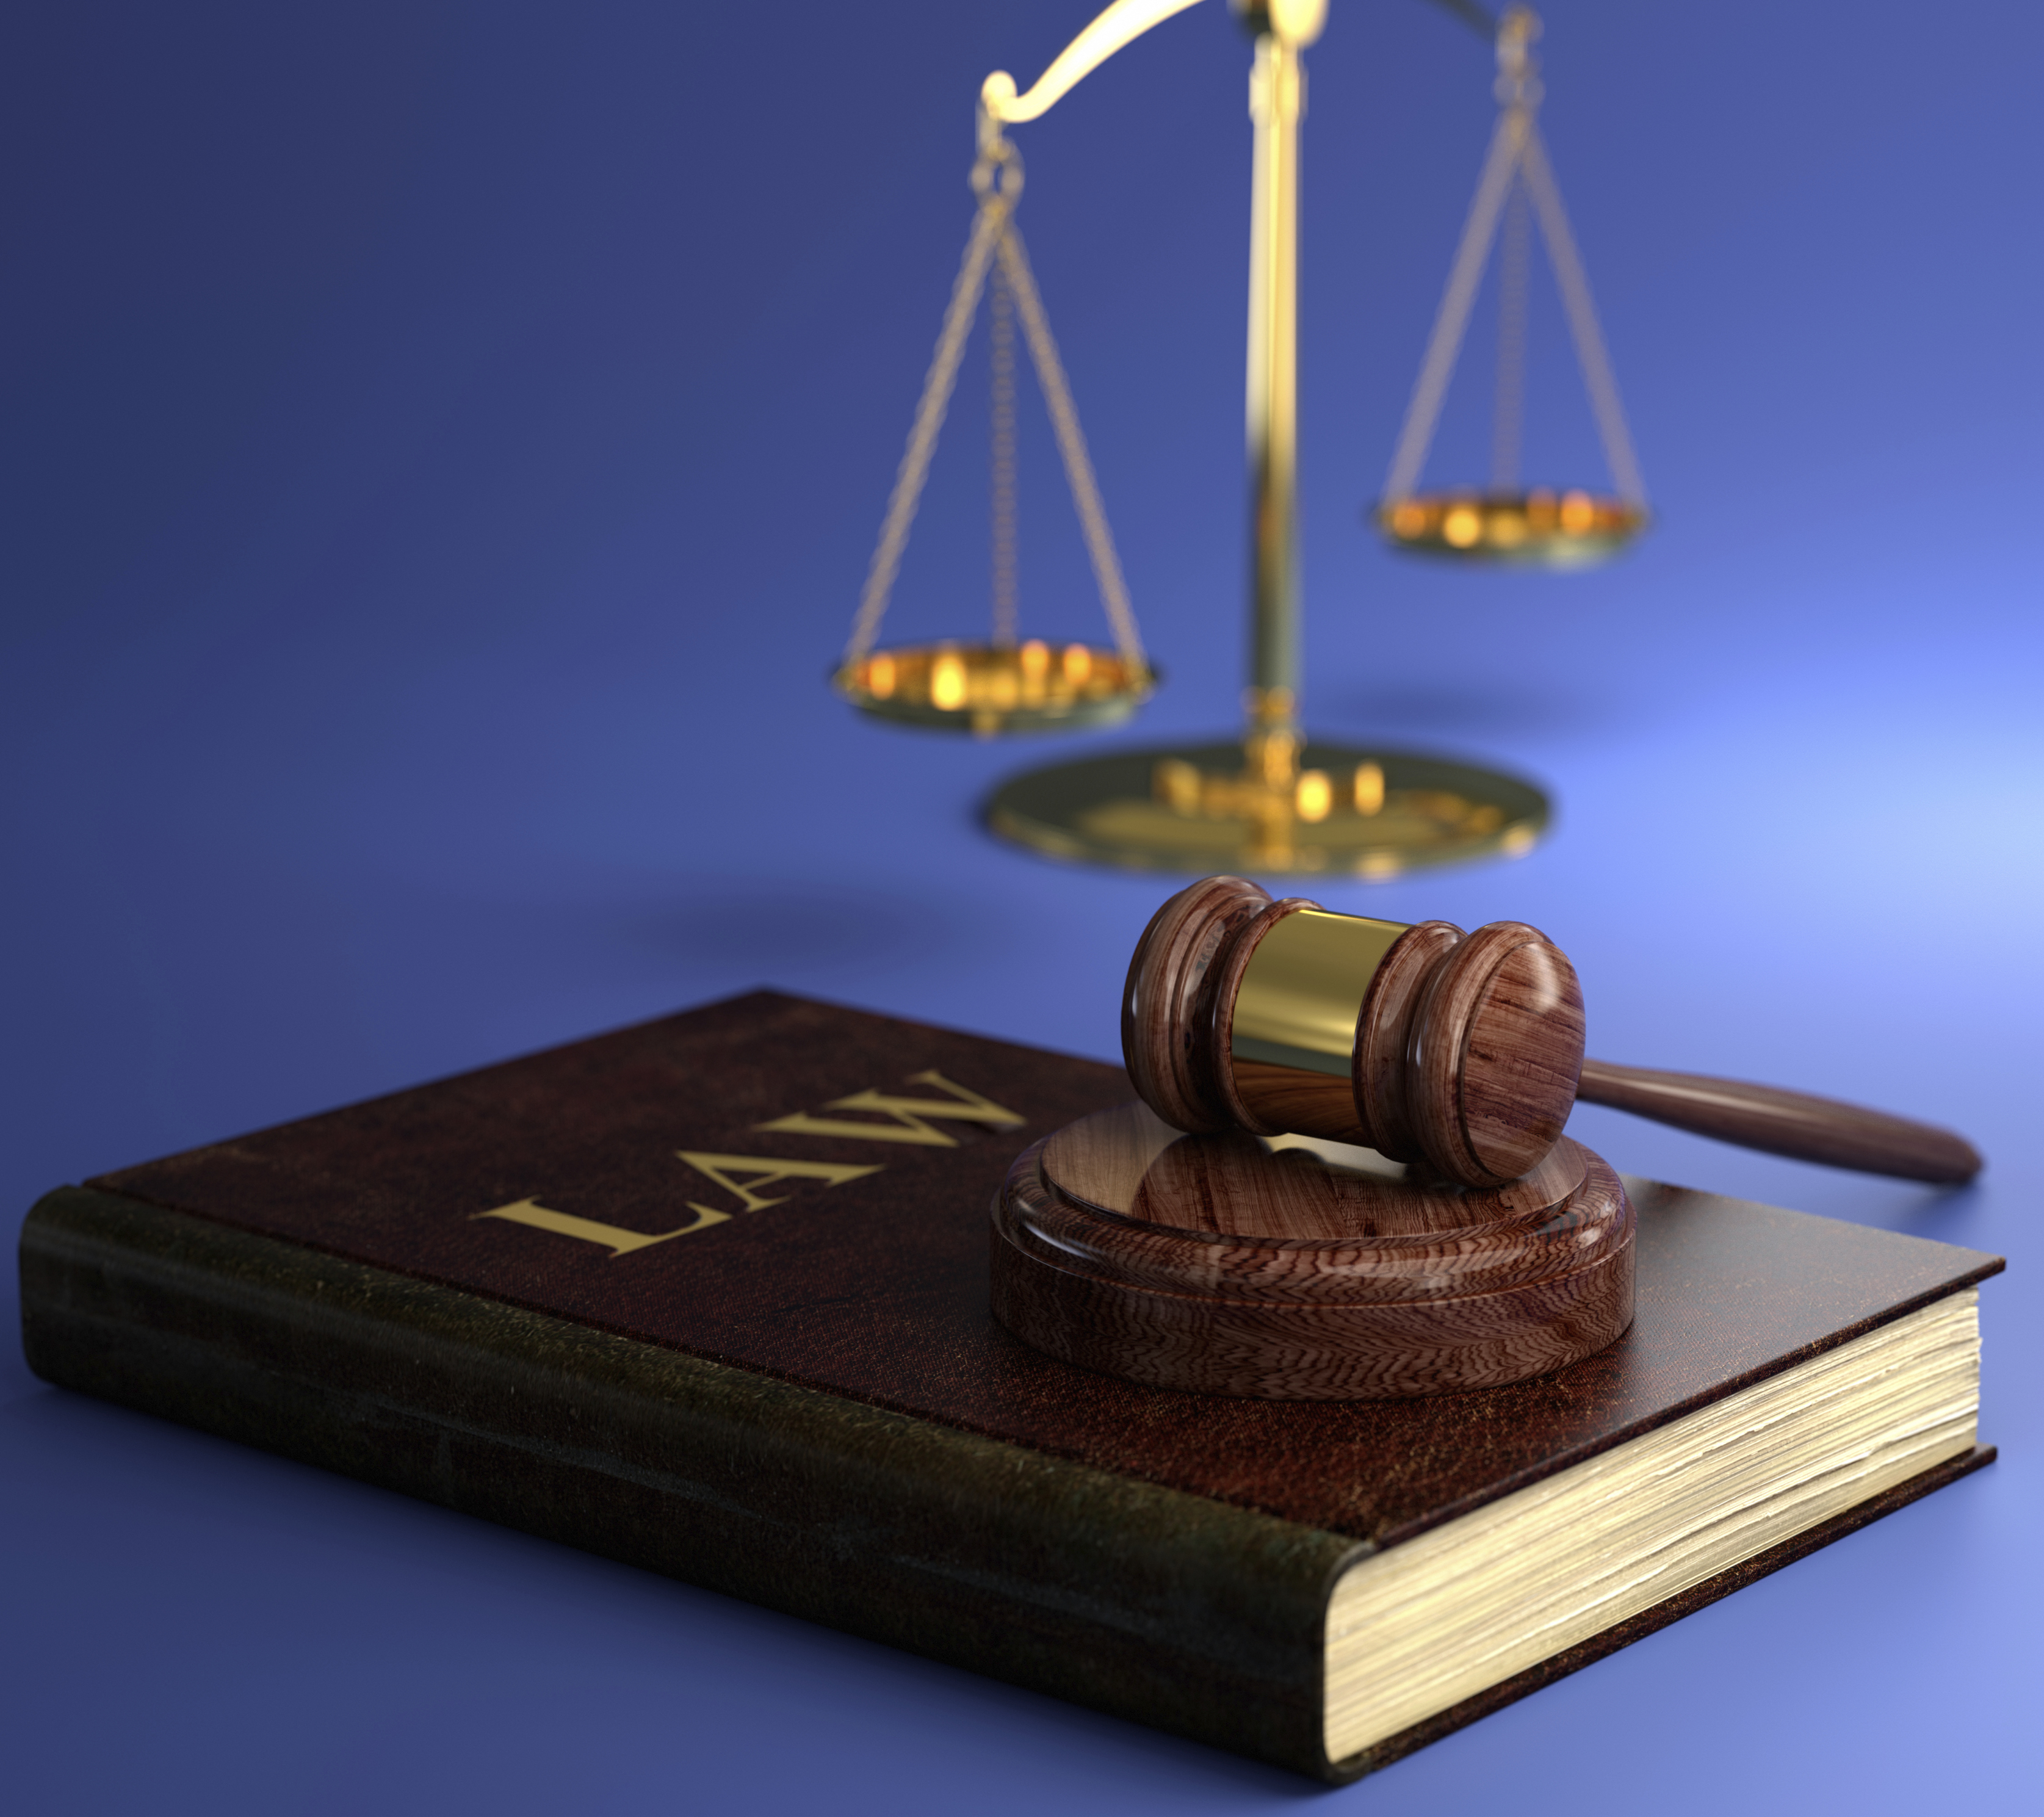 law written book and scales, wallpapers hd free